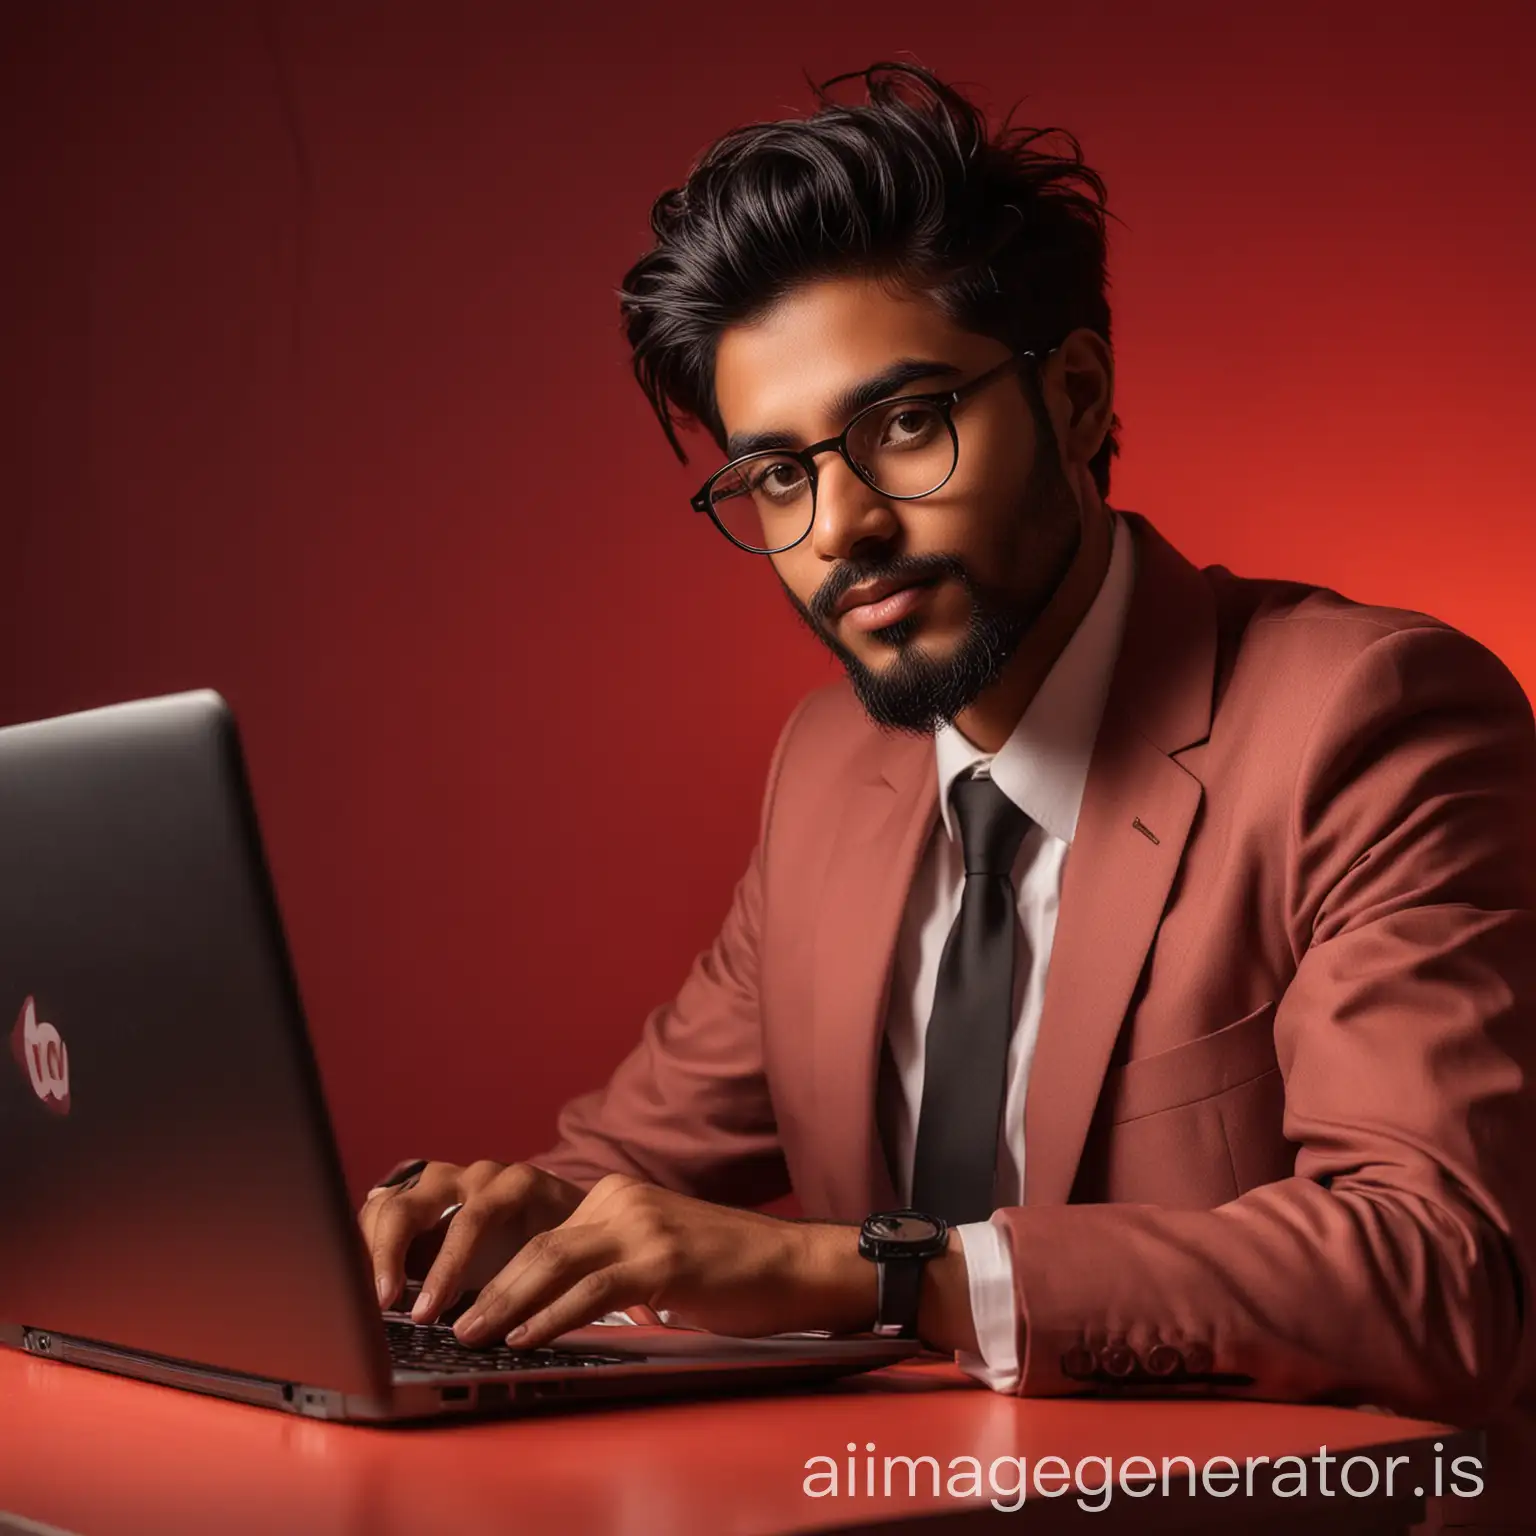 21 year old Indian boy with dusky skin trimmed beard medium length hair wearing spectacles sitting and looking into laptop for a linkedin picture in formals with a red light in background


